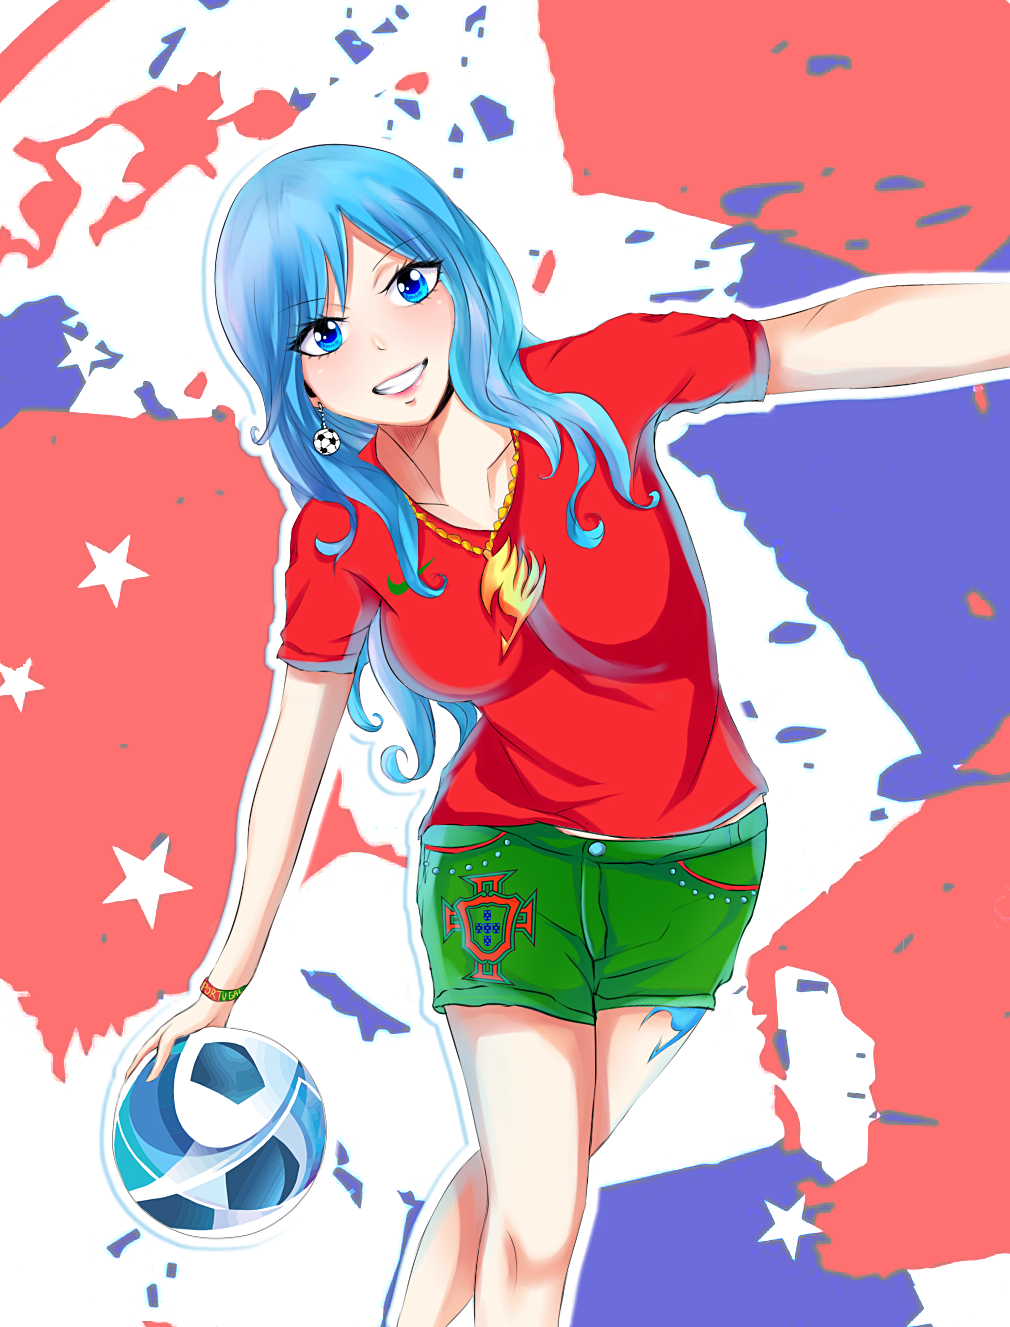 1girl 2018_fifa_world_cup ball bangs blue_eyes blue_hair earrings fairy_tail green_shorts holding juvia_lockser long_hair necklace portugal red_shirt smile soccer soccer_uniform solo trousers world_cup